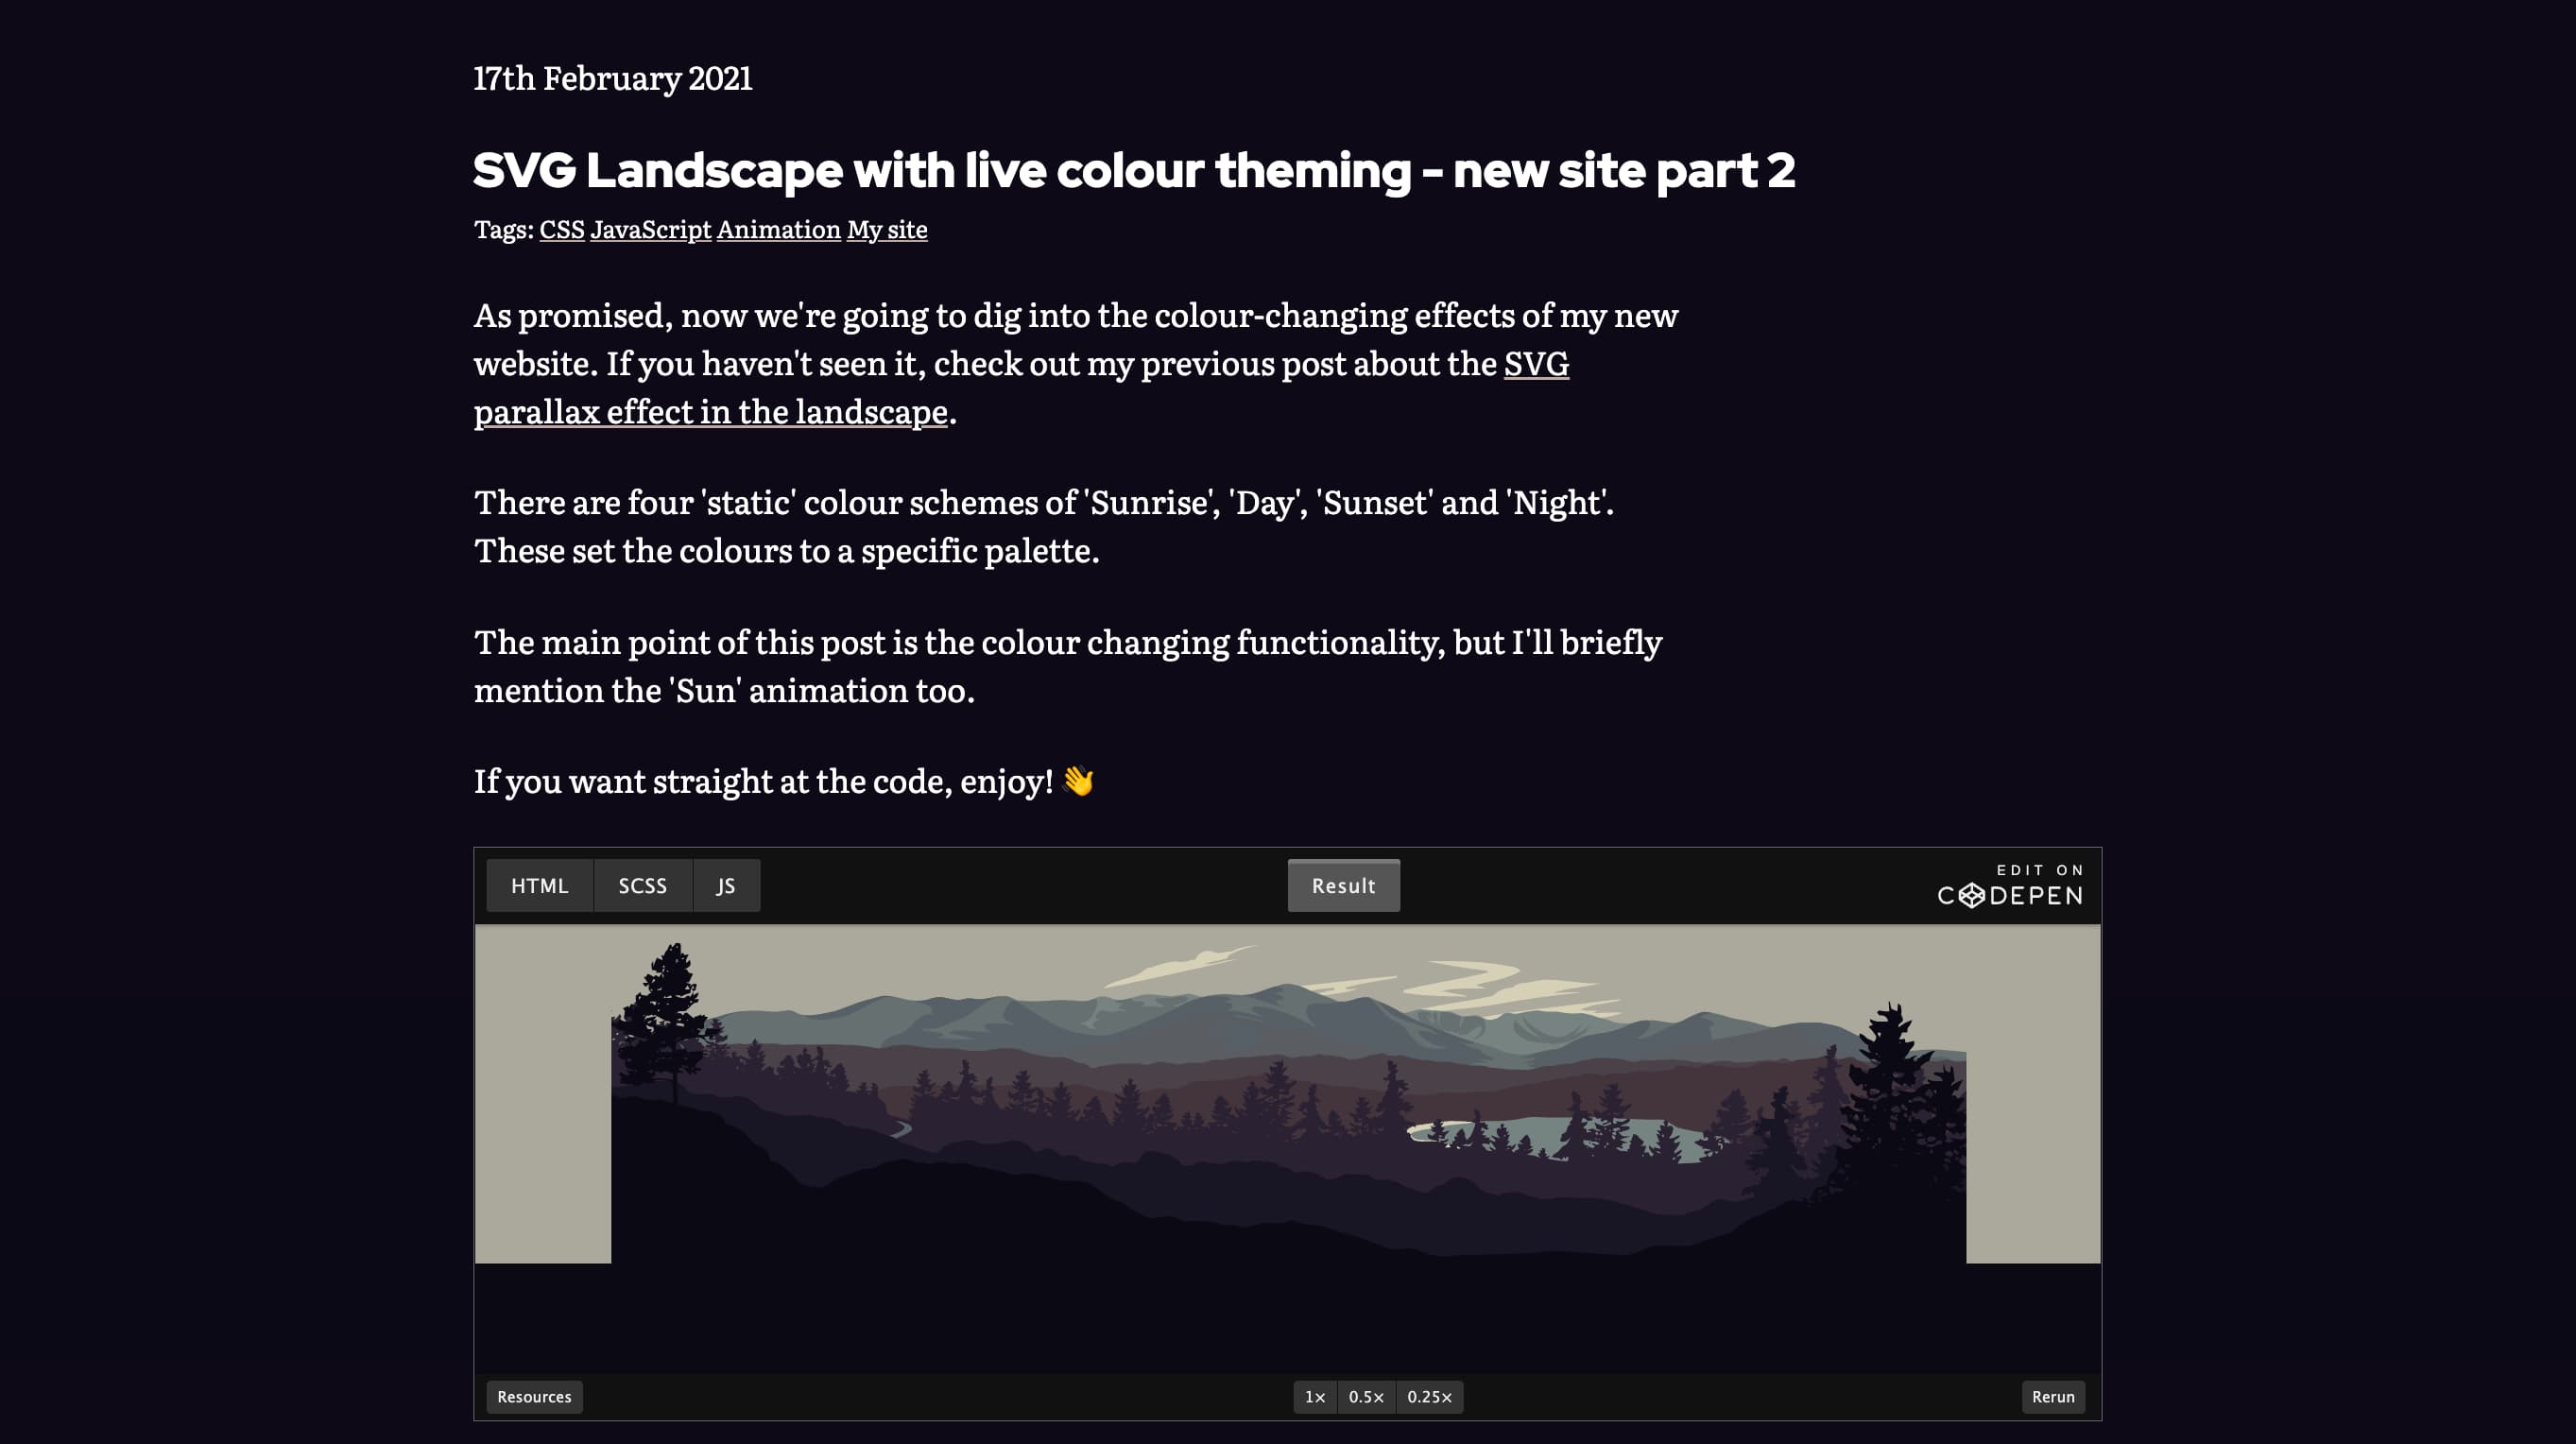 Screenshot of blog post, titled 'SVG Landscape with live colour theming - new site part 2', link in caption